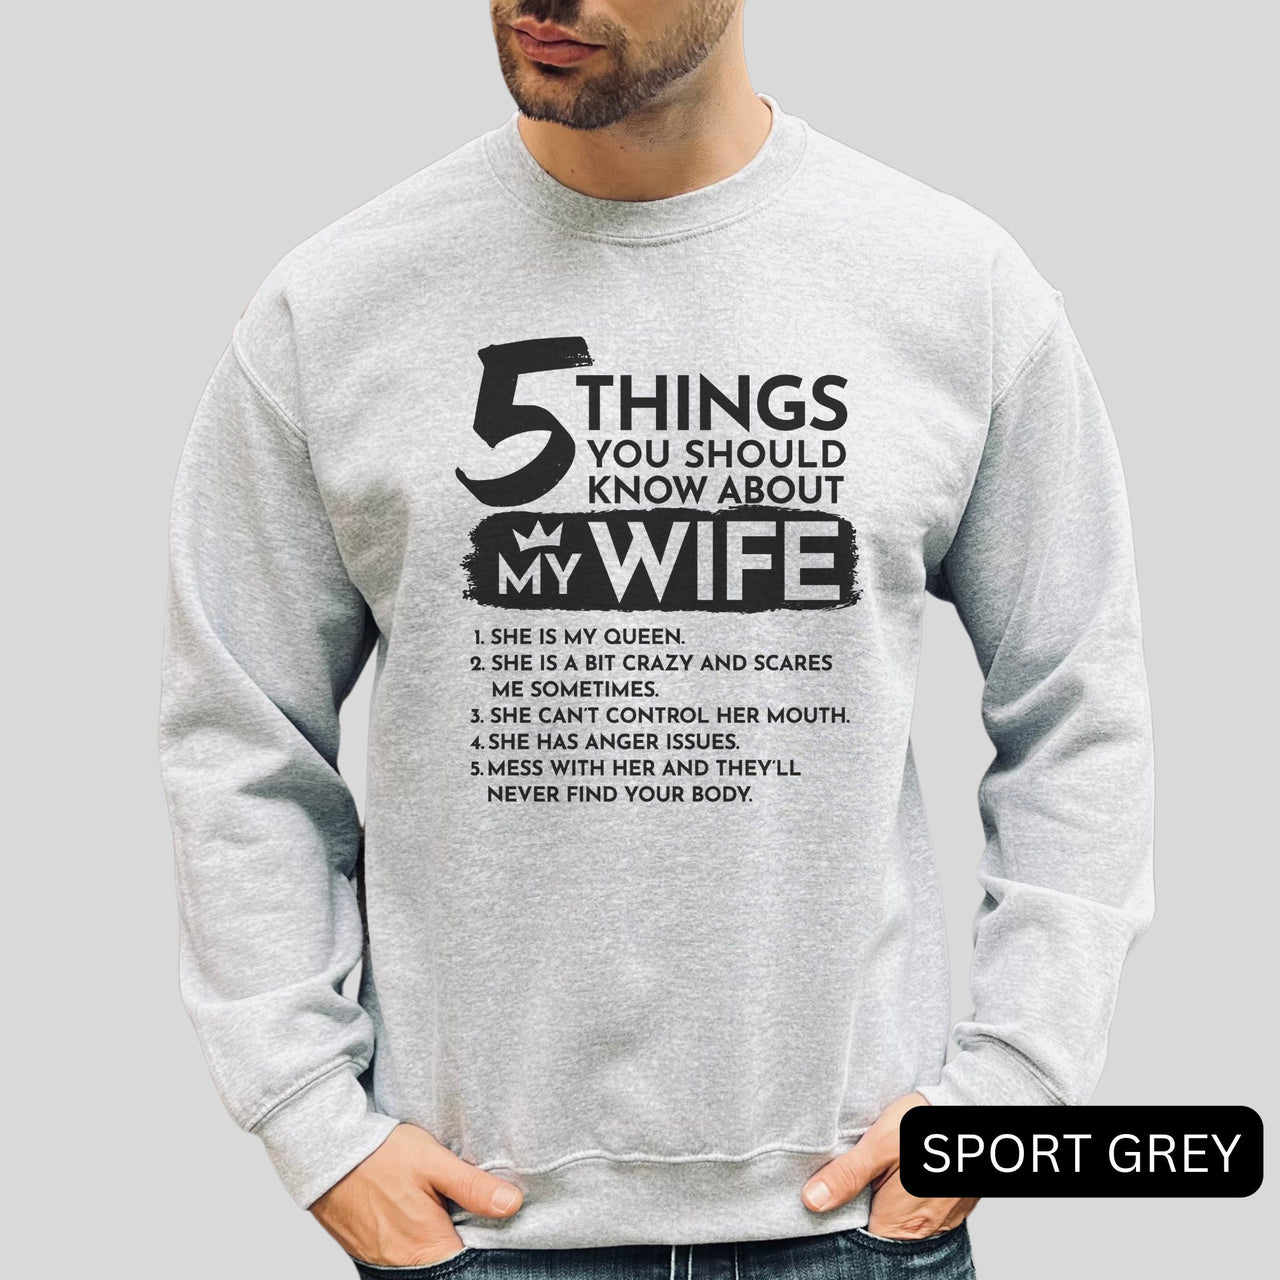 5 Things You Should Know About My Wife Sweatshirt